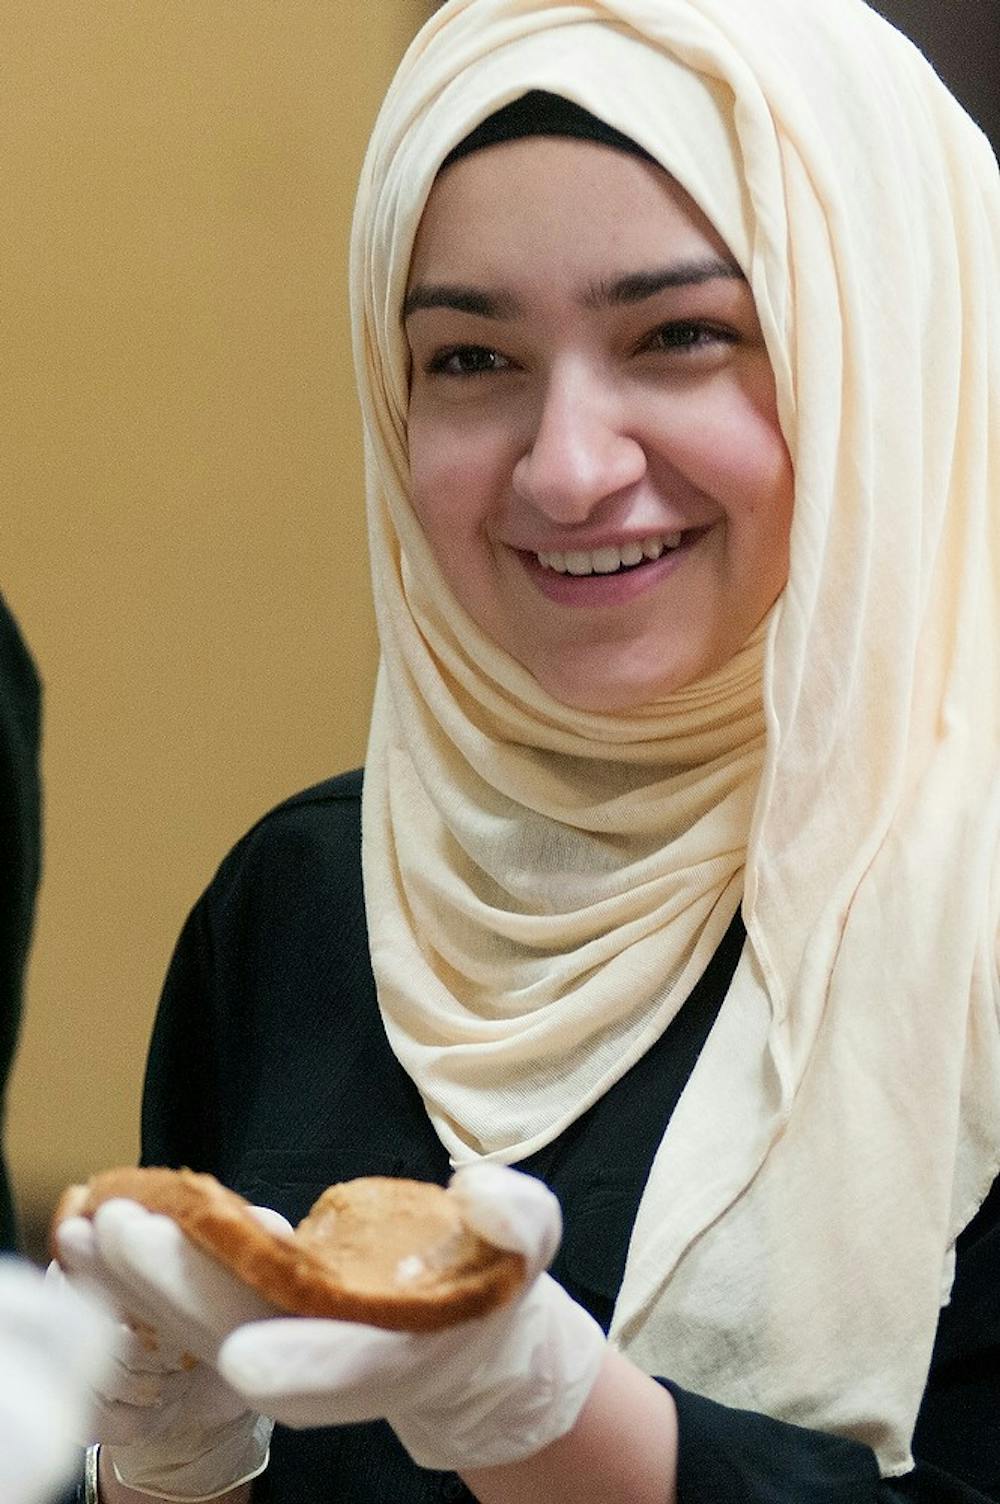 <p>Computer science sophomore Lama Aboubakr prepares peanut butter and jelly sandwiches on Sept. 26, 2014, at the Islamic Society of Greater Lansing, 940 South Harrison Road, in East Lansing. Food was prepared and distributed to the homeless of Lansing. Aerika Williams/ State News</p>